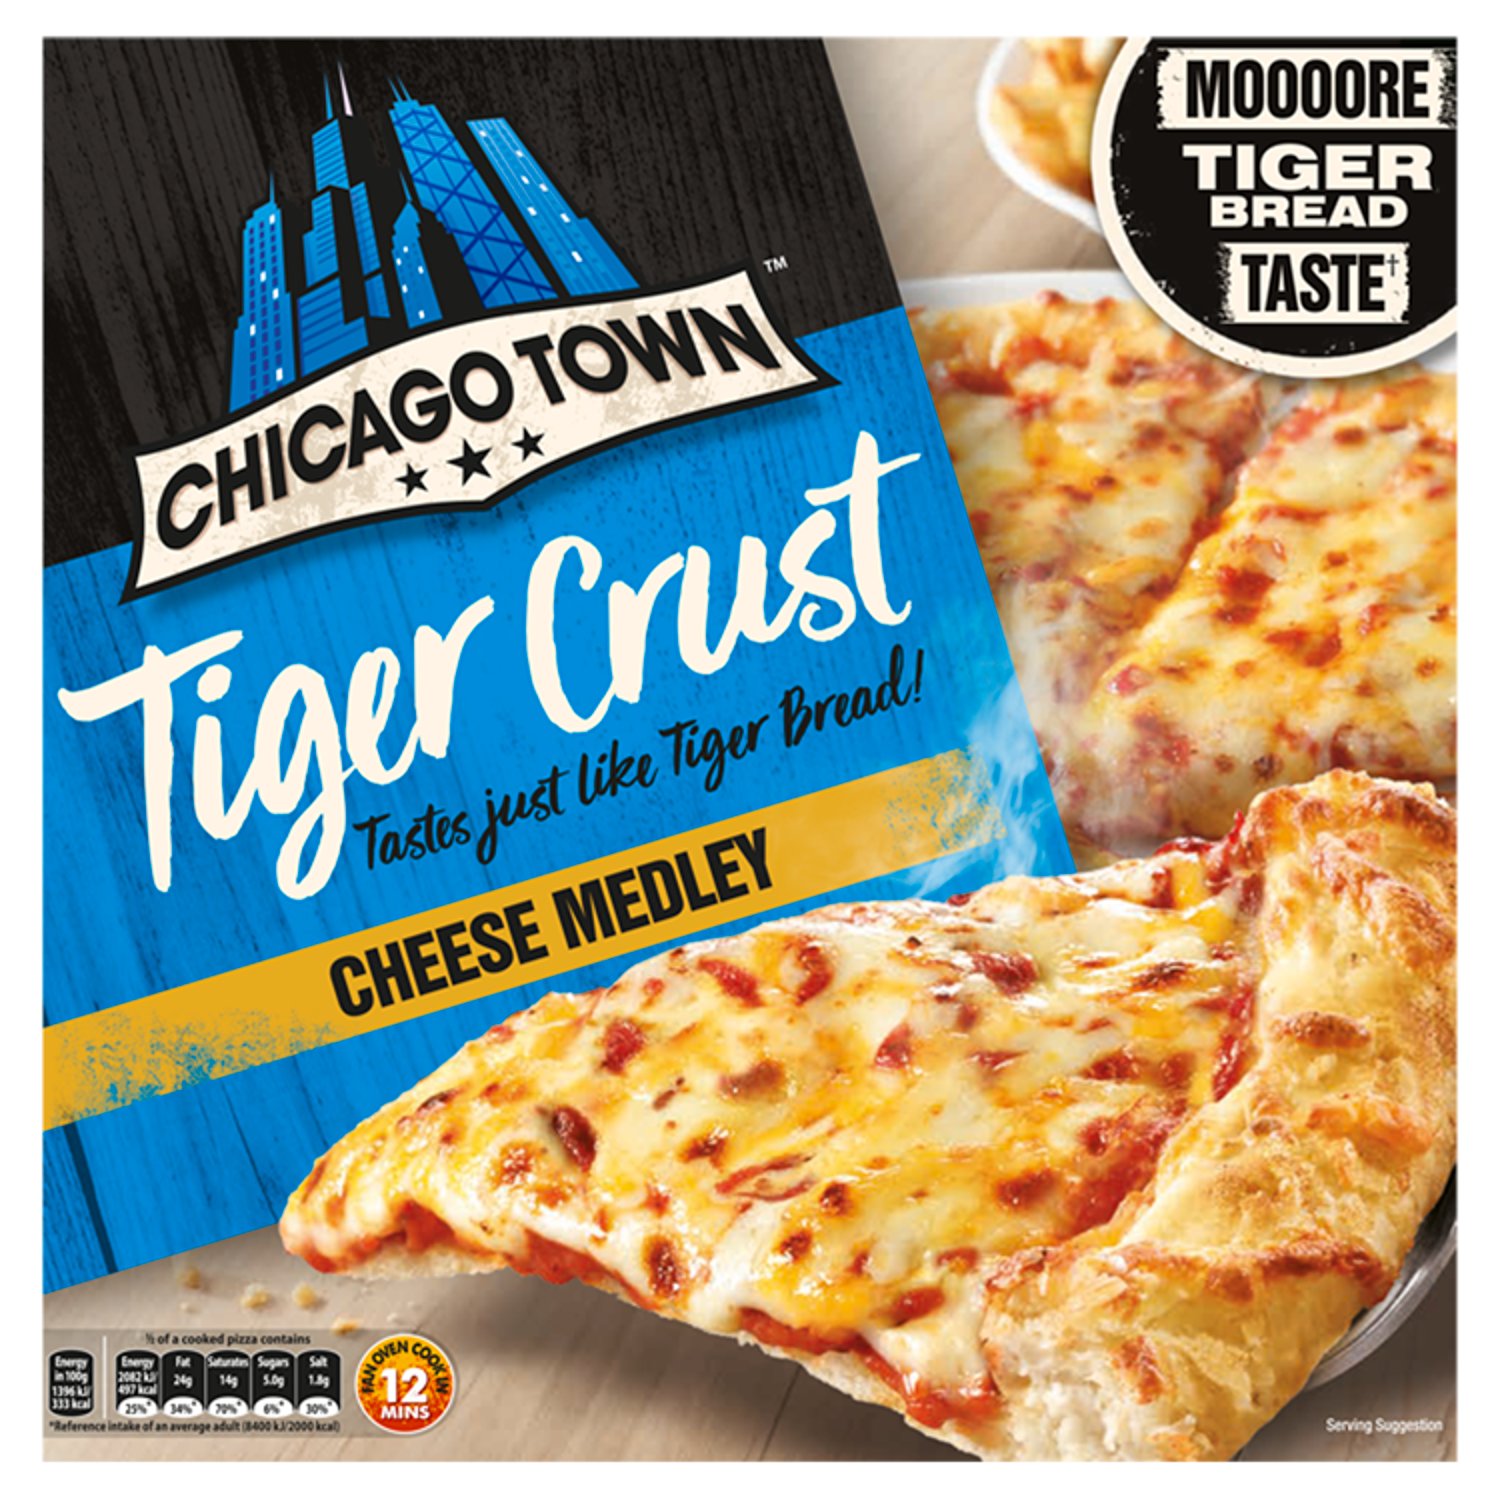 Chicago Town Cheese Medley Tiger Crust Pizza  (305 g)